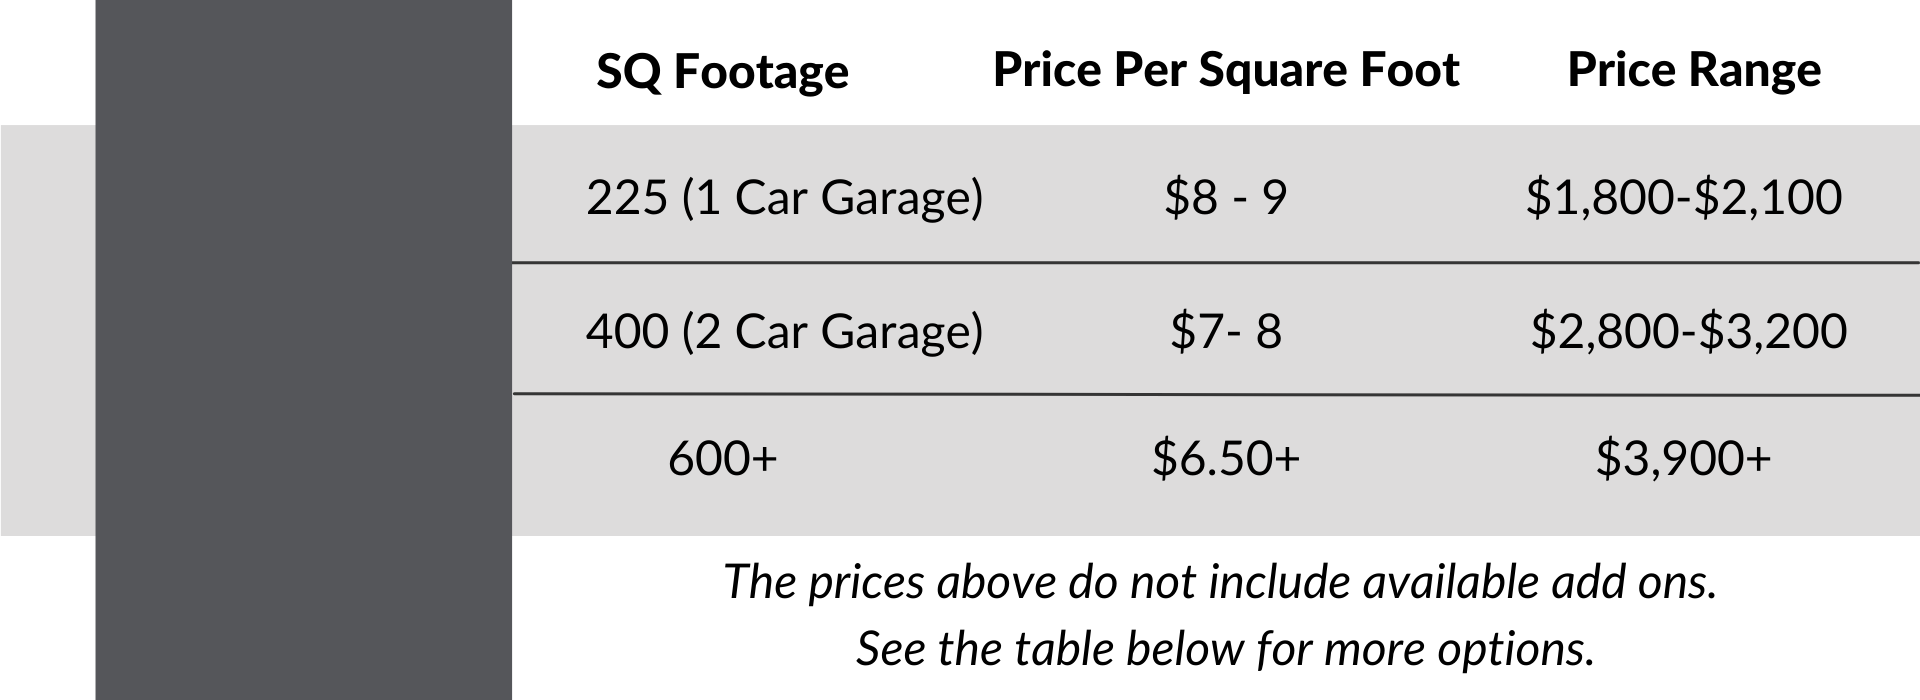 a table showing the price per square foot for a car garage